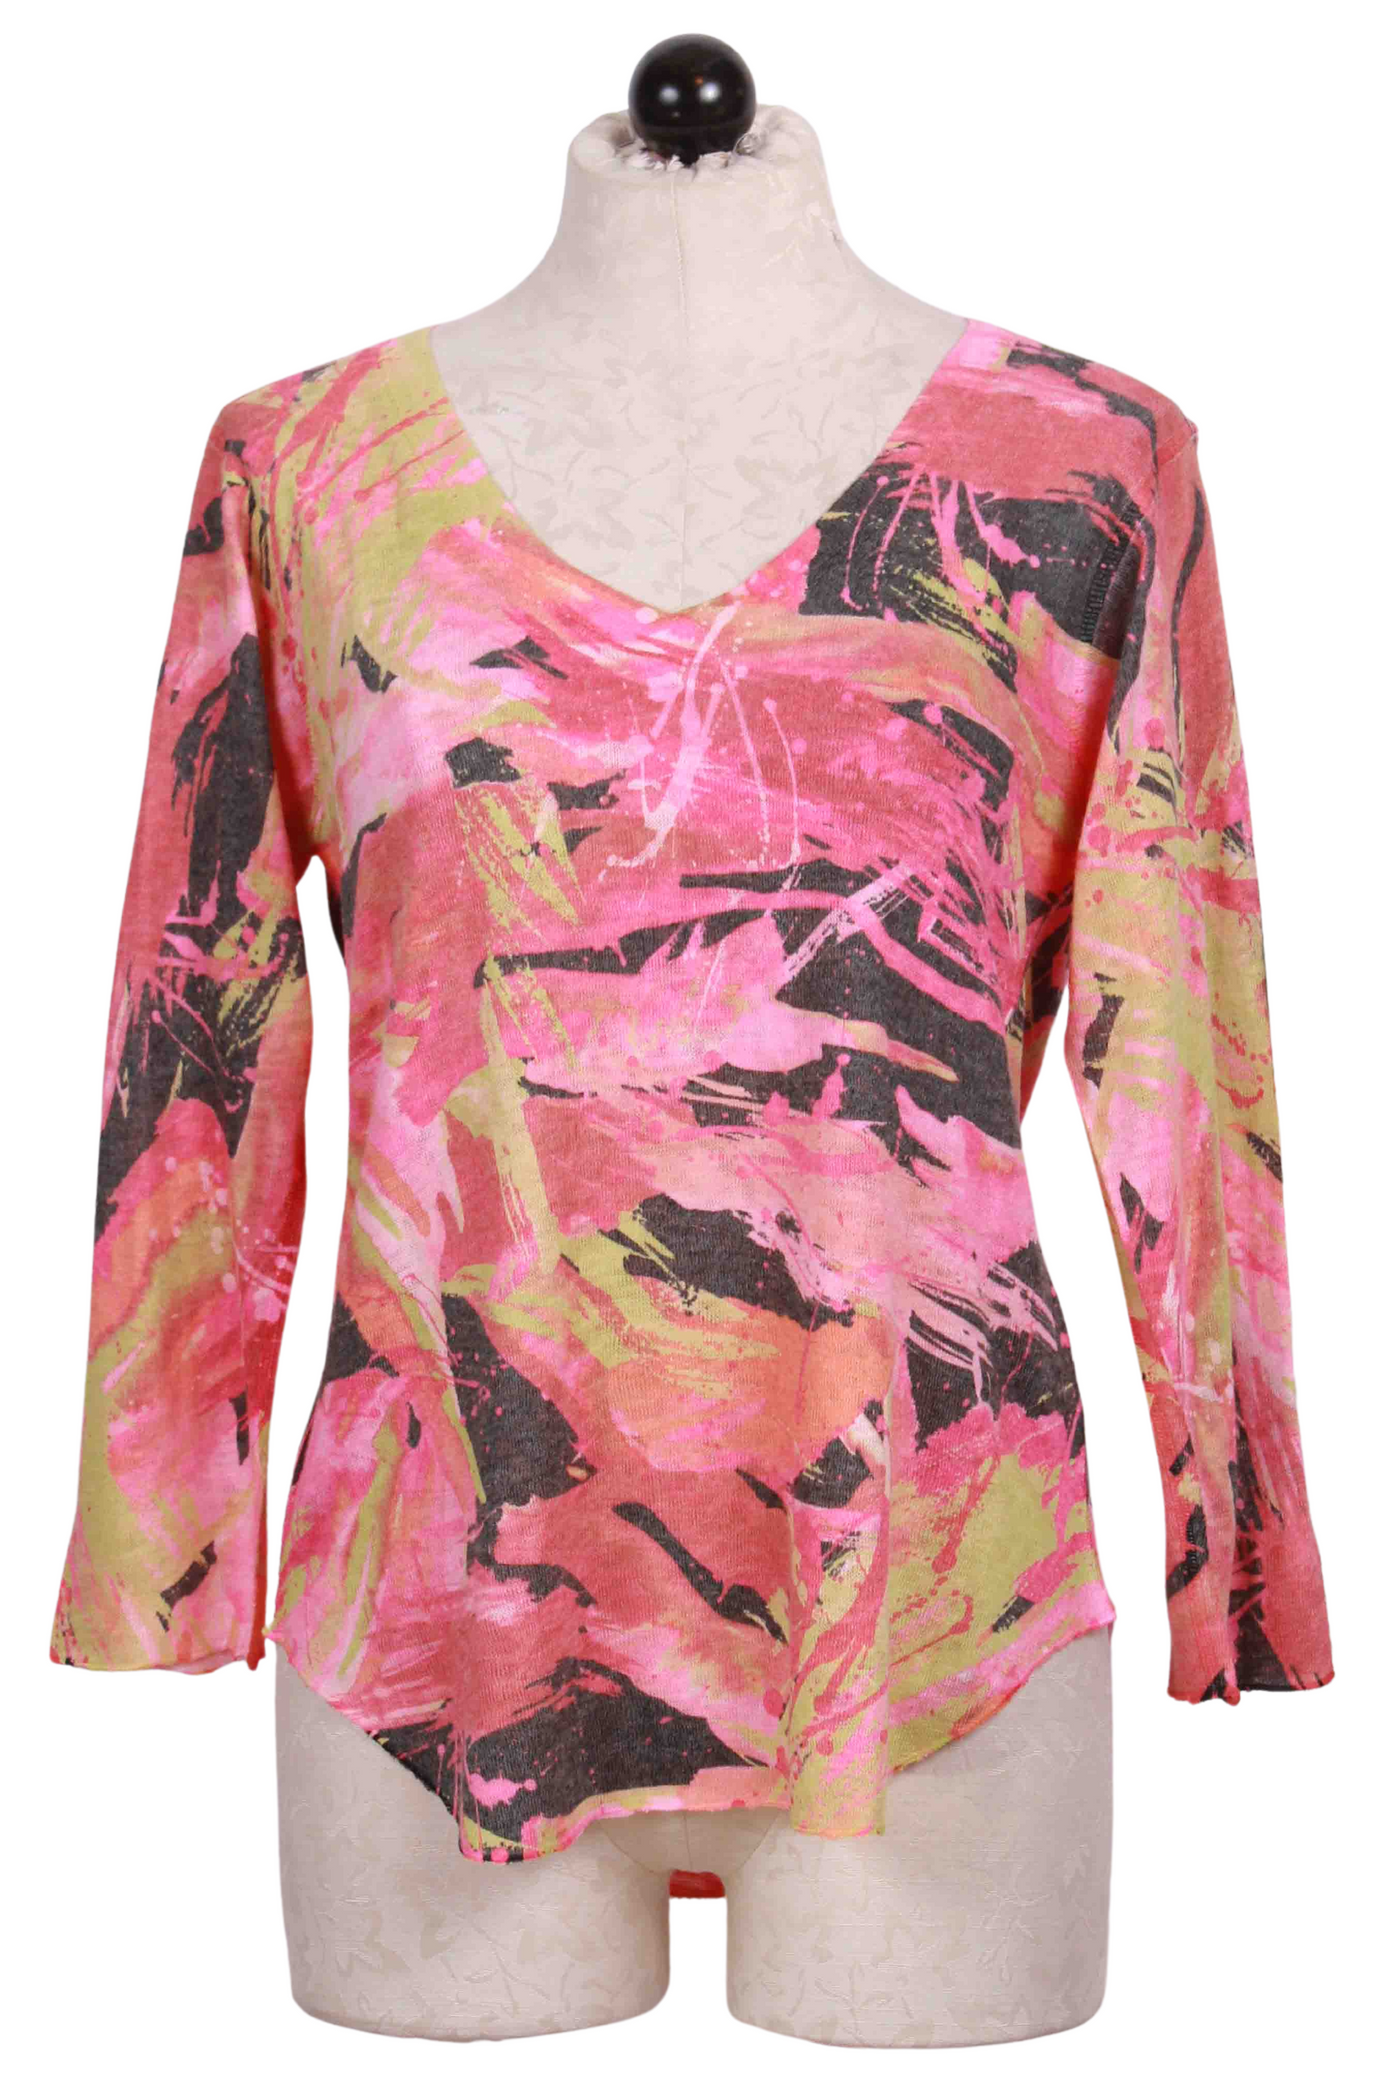 Coral Multicolored Abstract Print V Neck Top by Nally and Millie